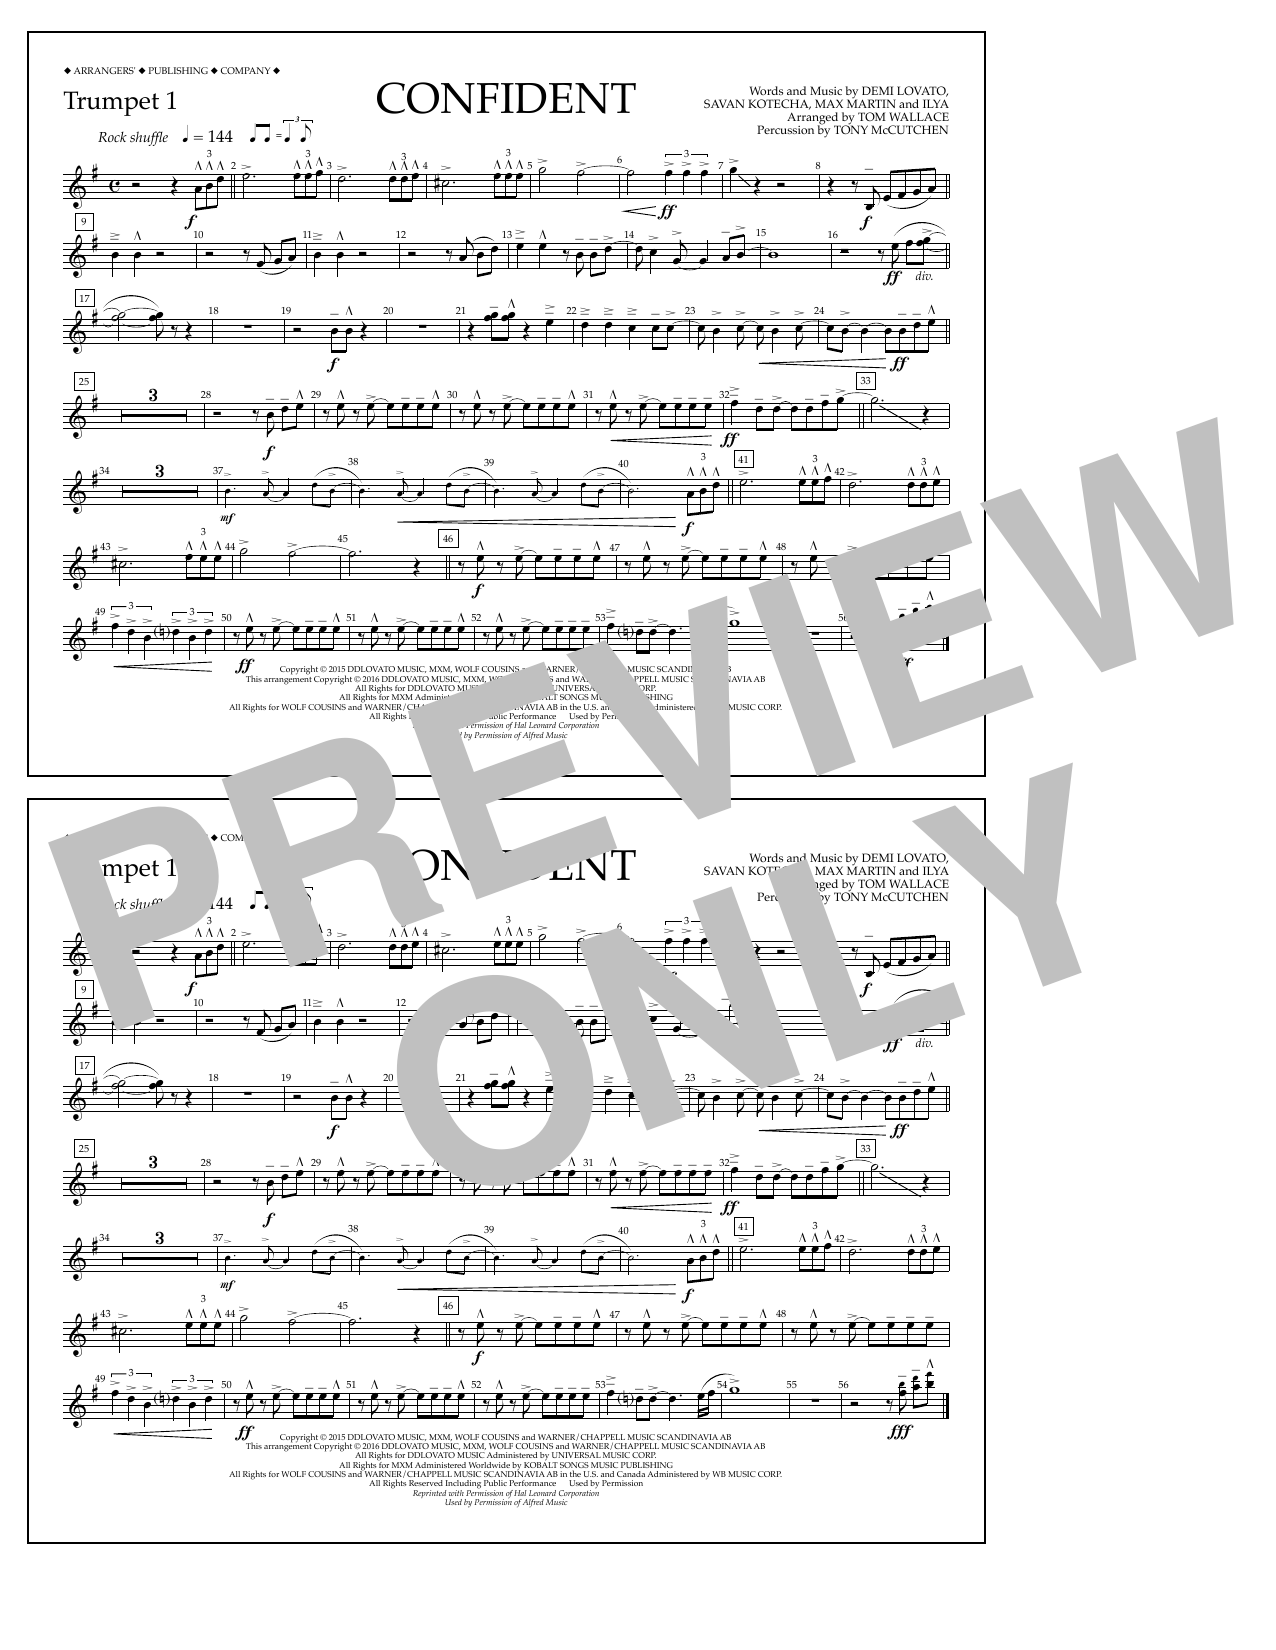 Download Tom Wallace Confident - Trumpet 1 Sheet Music